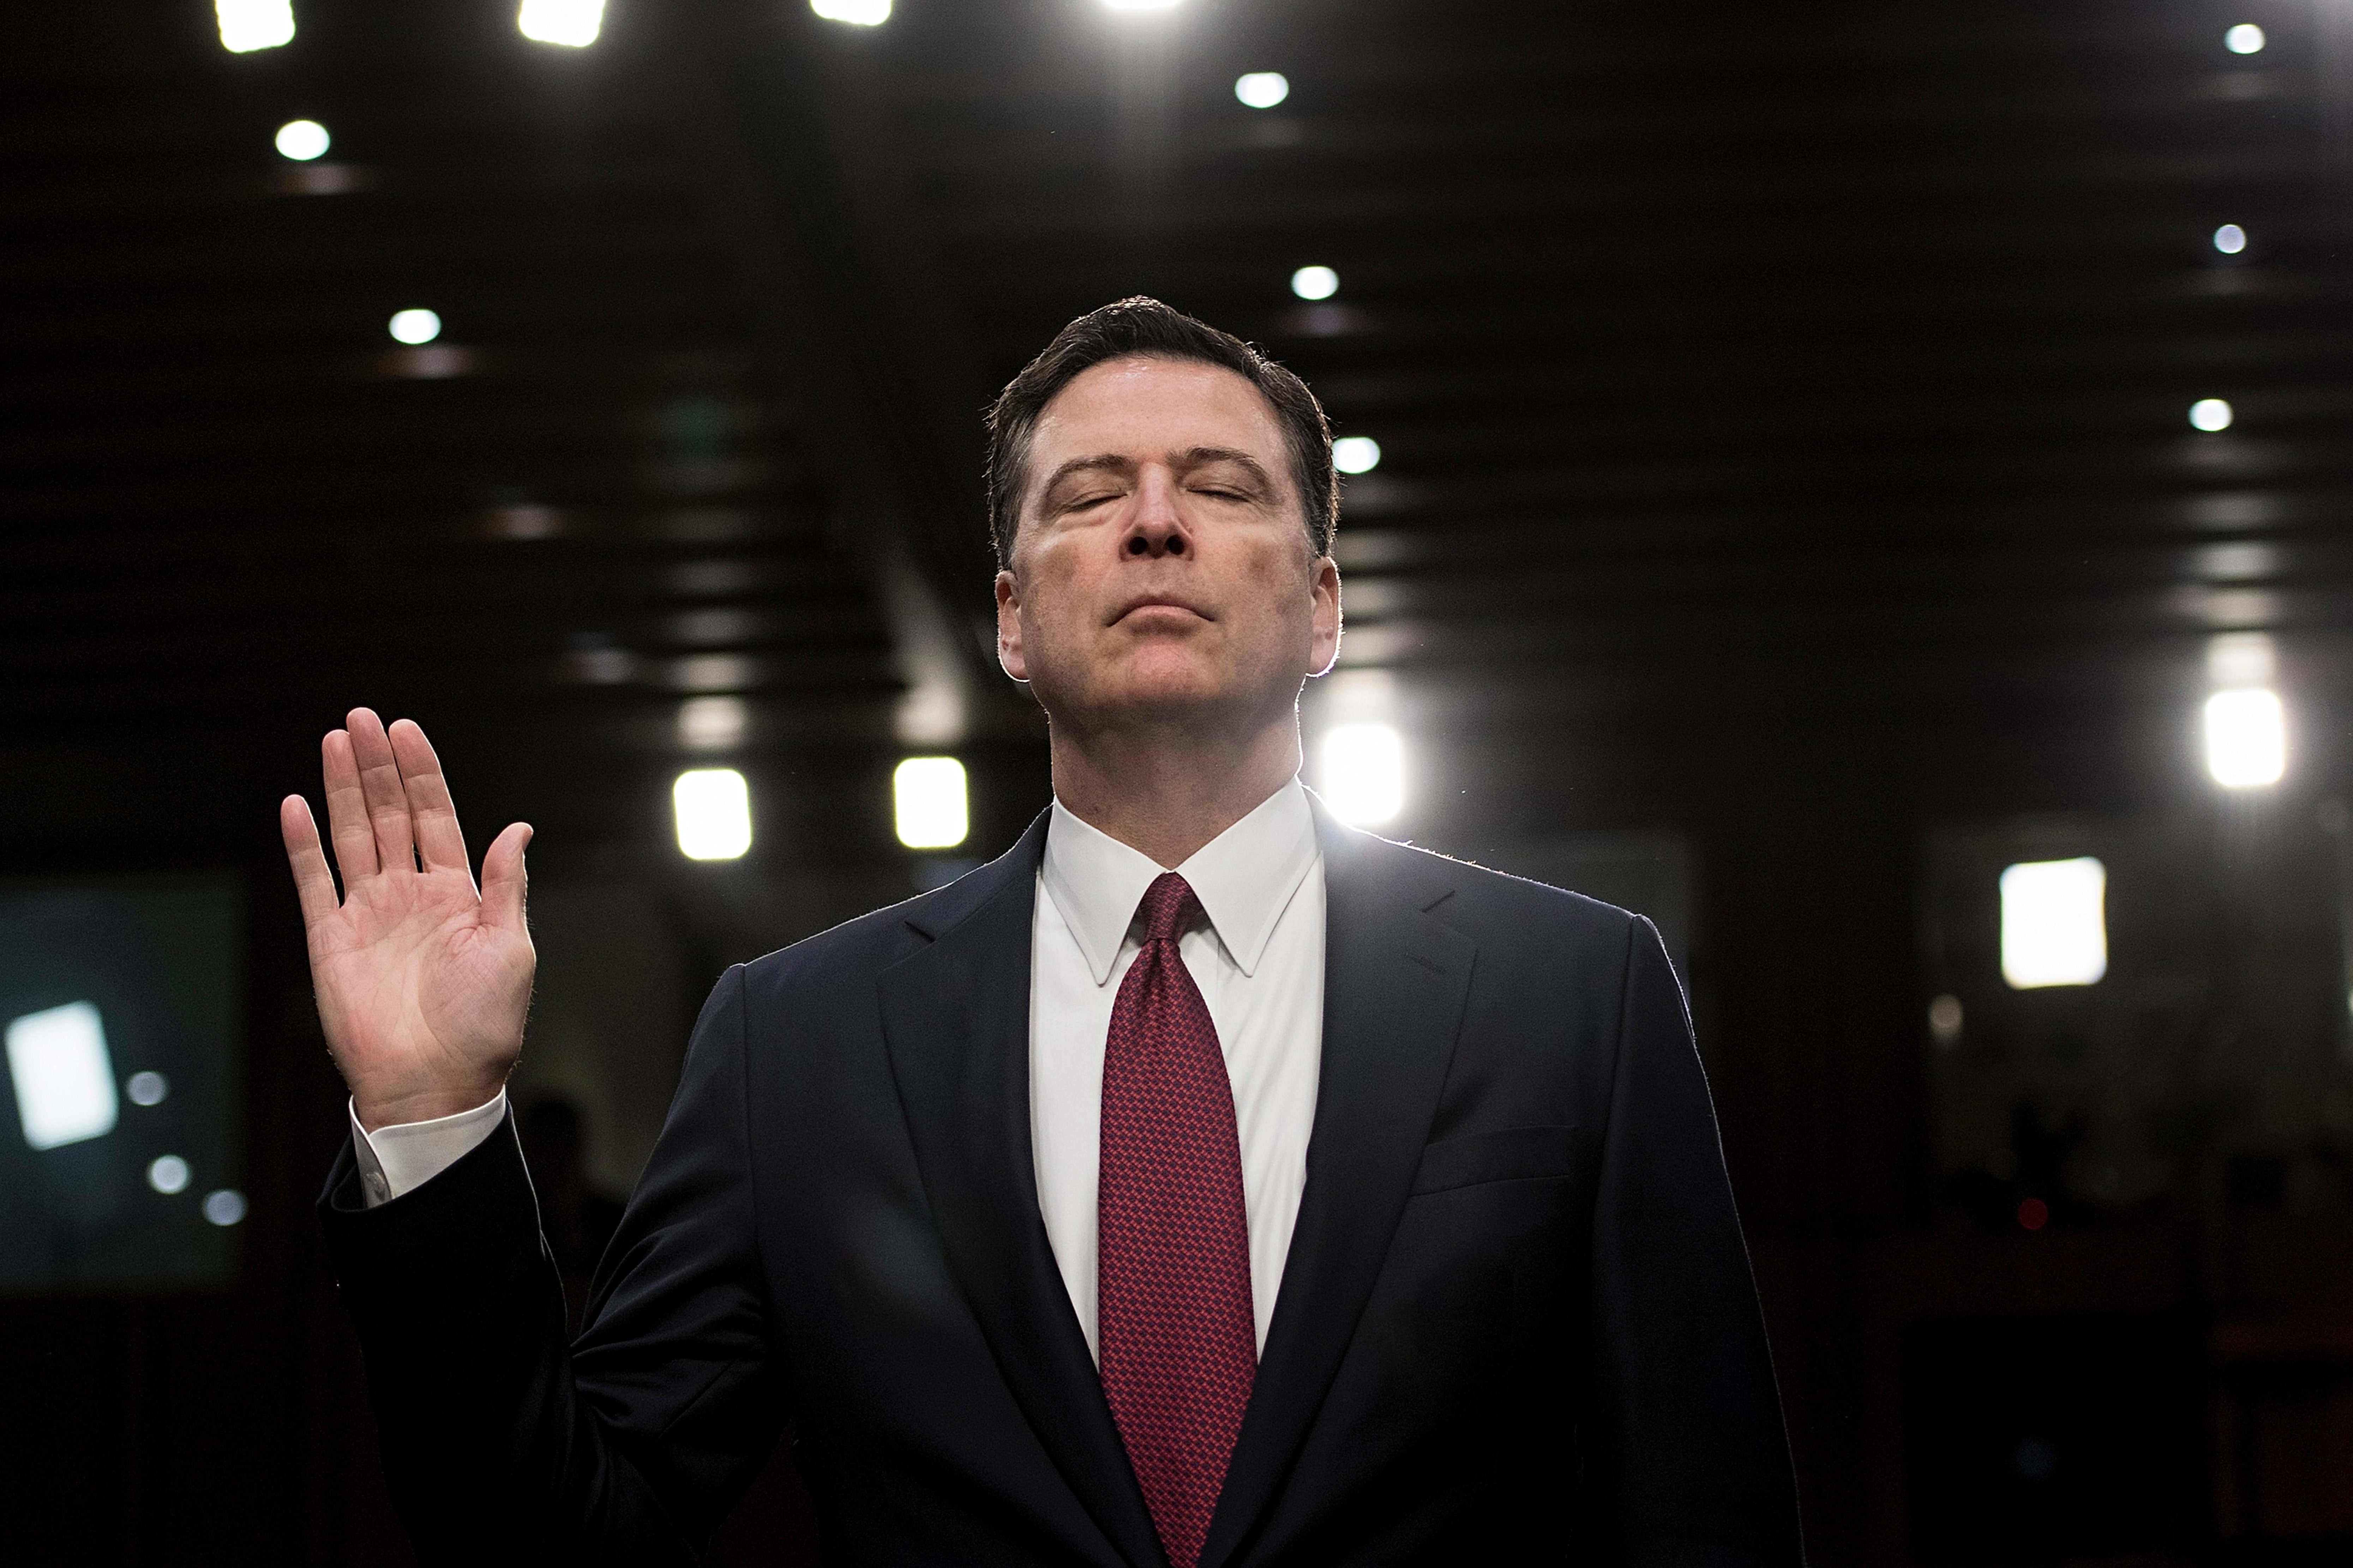 Ousted FBI director James Comey is sworn in during a hearing before the Senate Select Committee on Intelligence on Capitol Hill June 8, 2017 in Washington, D.C.